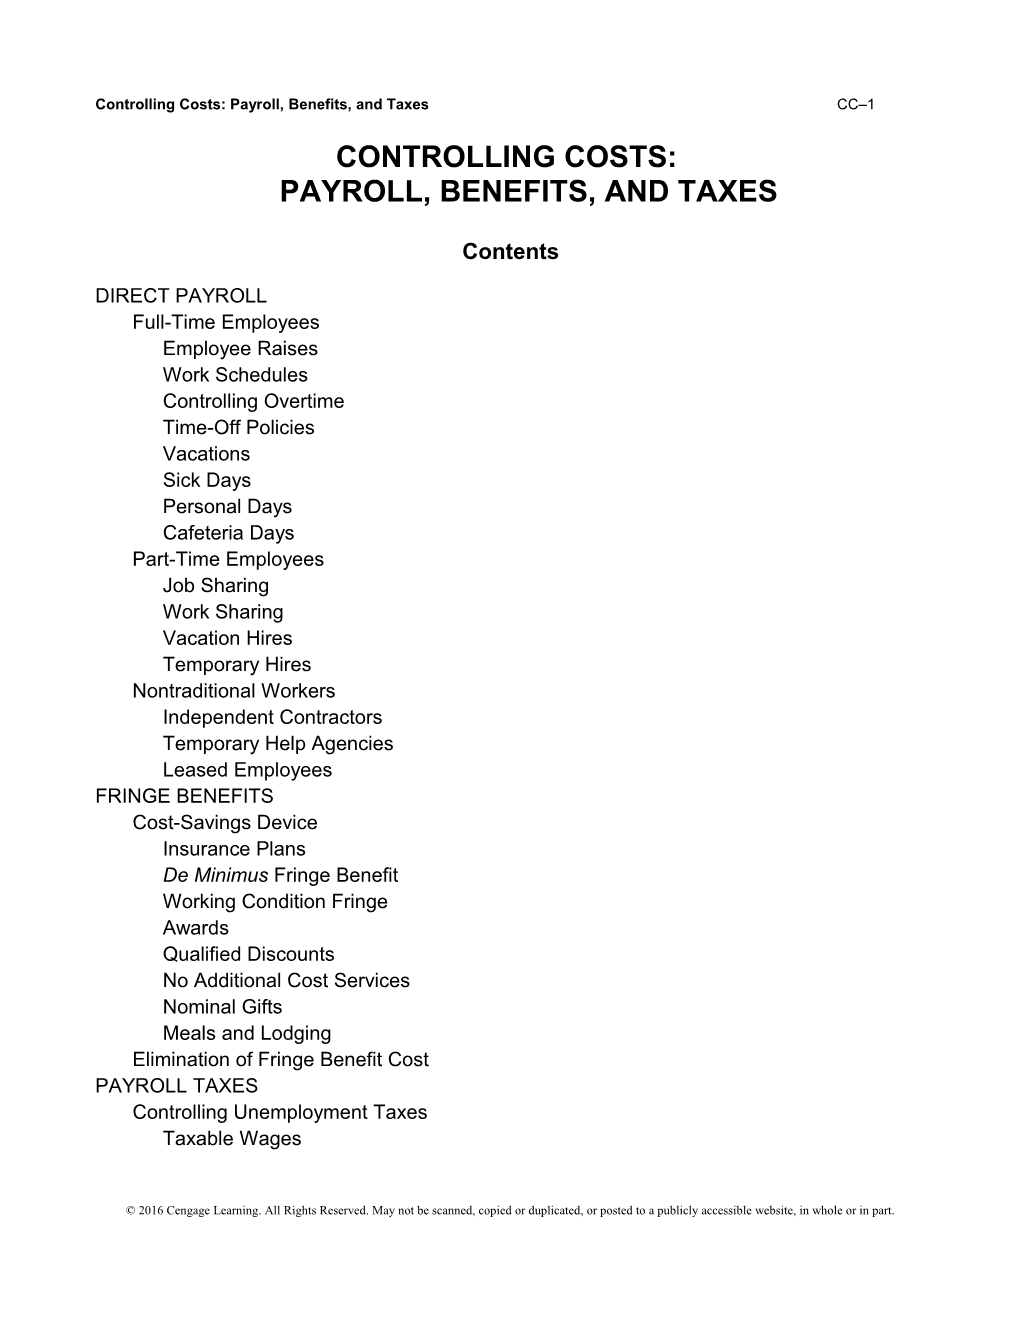 Controlling Costs: Payroll, Benefits, and Taxes